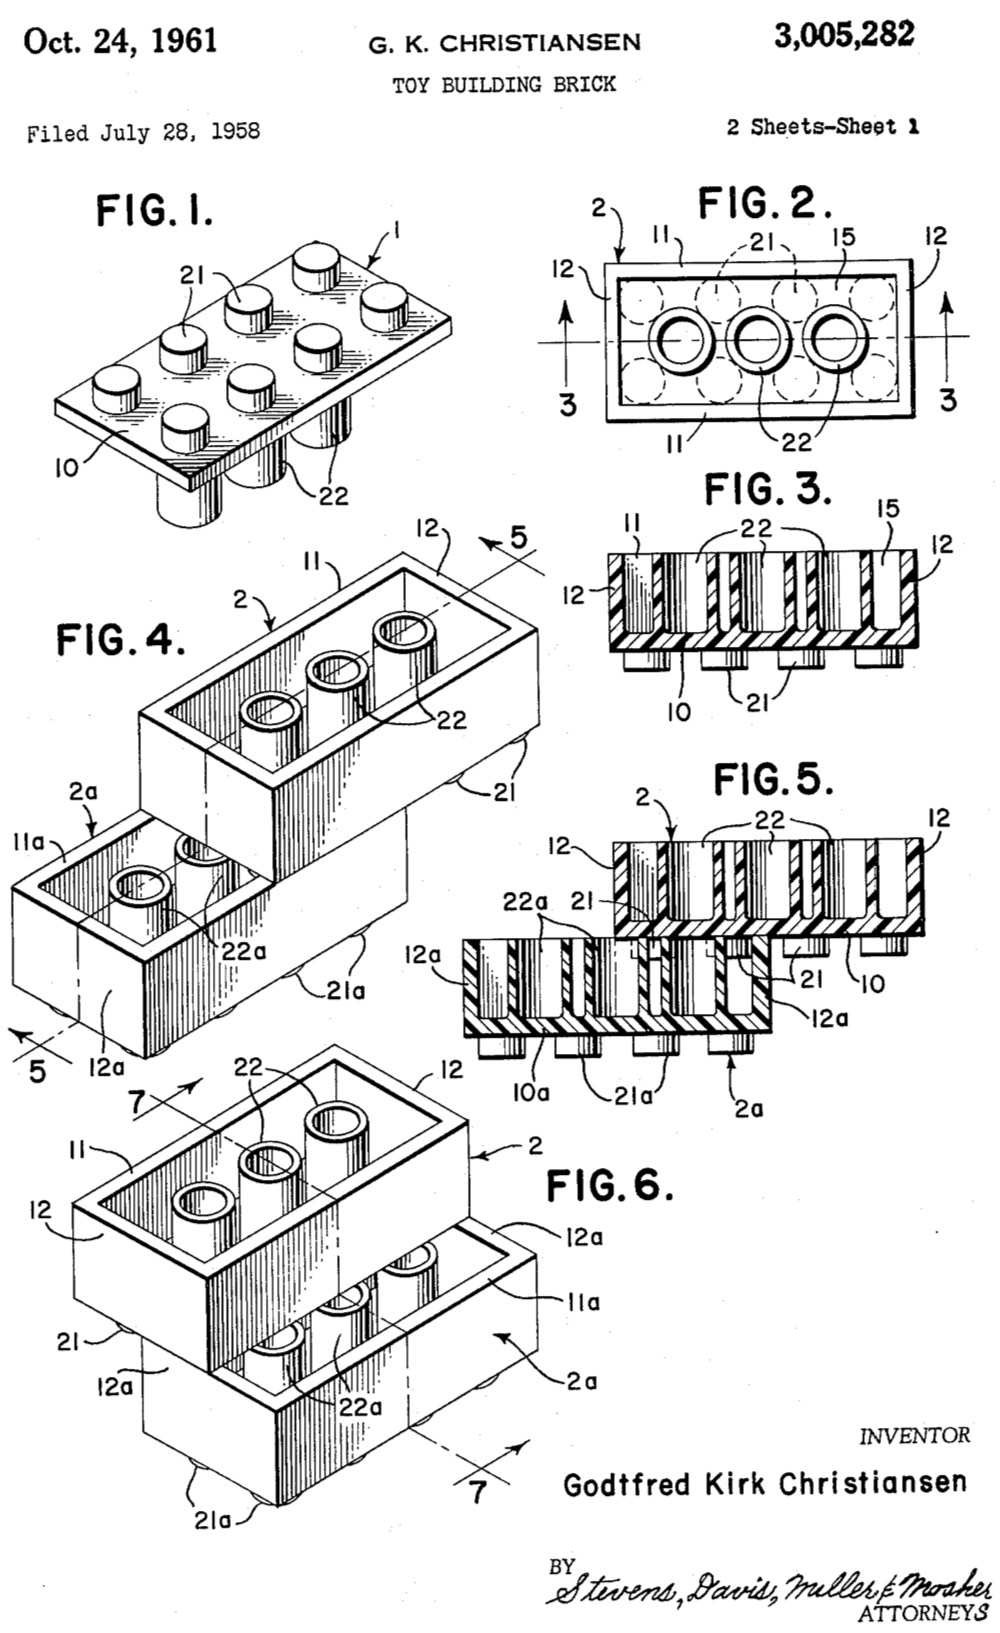 Original US patent drawing for the Lego brick